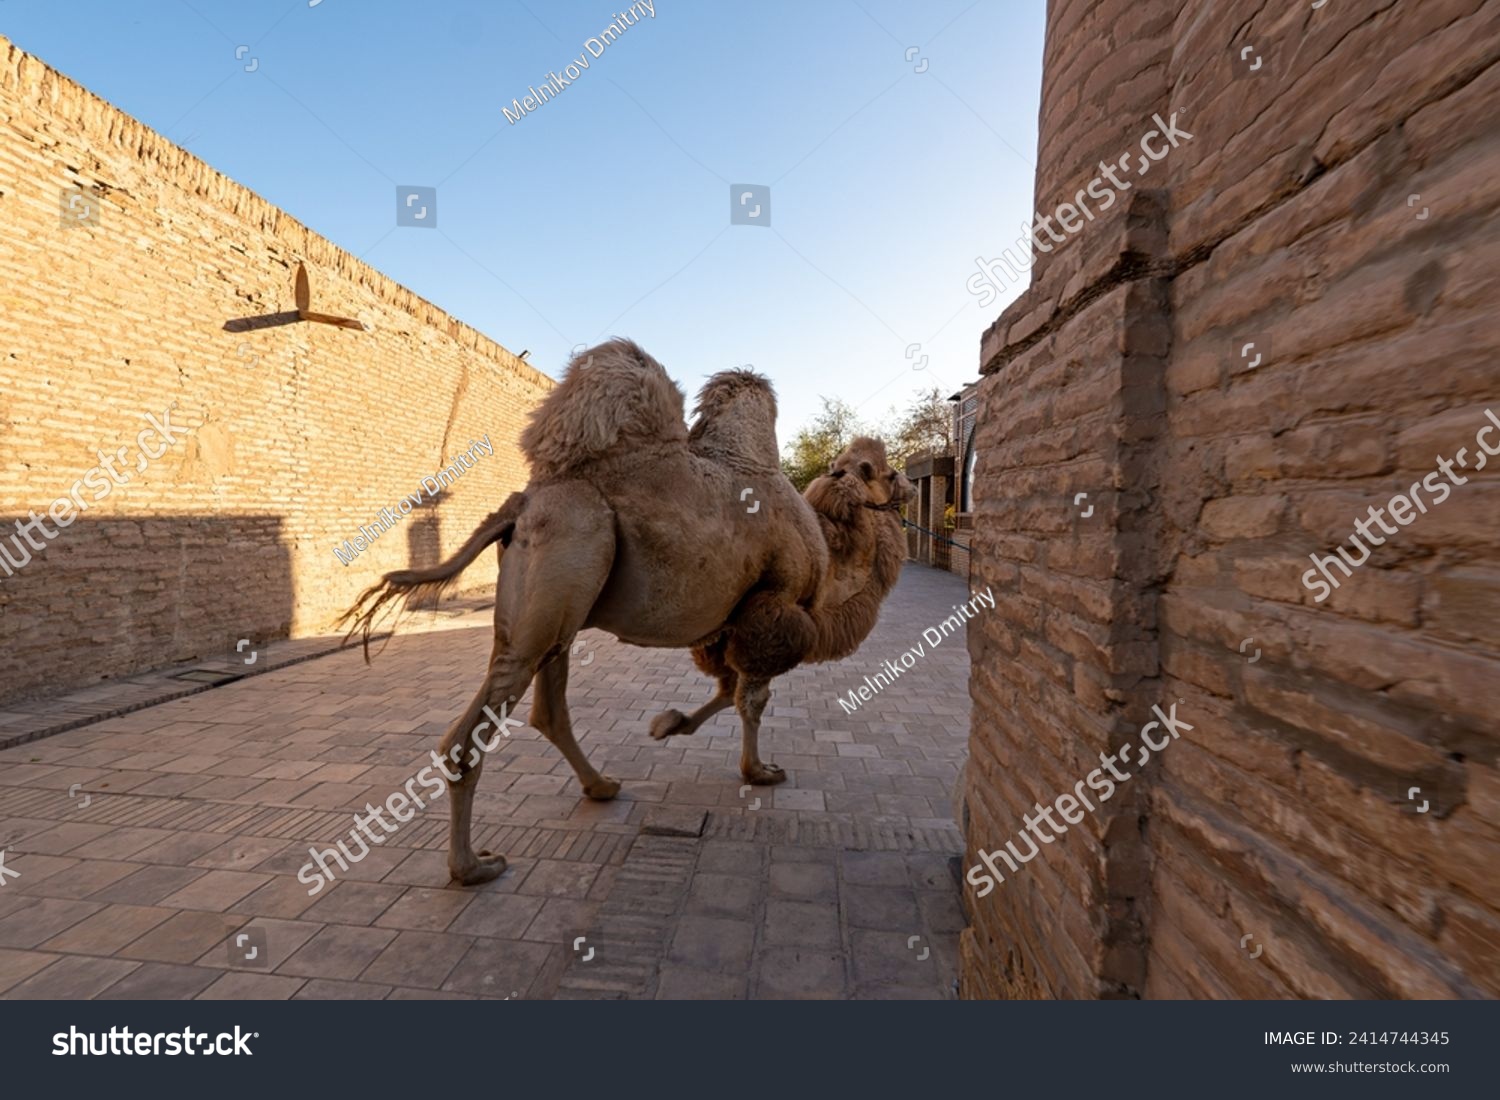 Bactrian Camel (Camelus bactrianus) poses in a small square in Khiva, Uzbekistan #2414744345